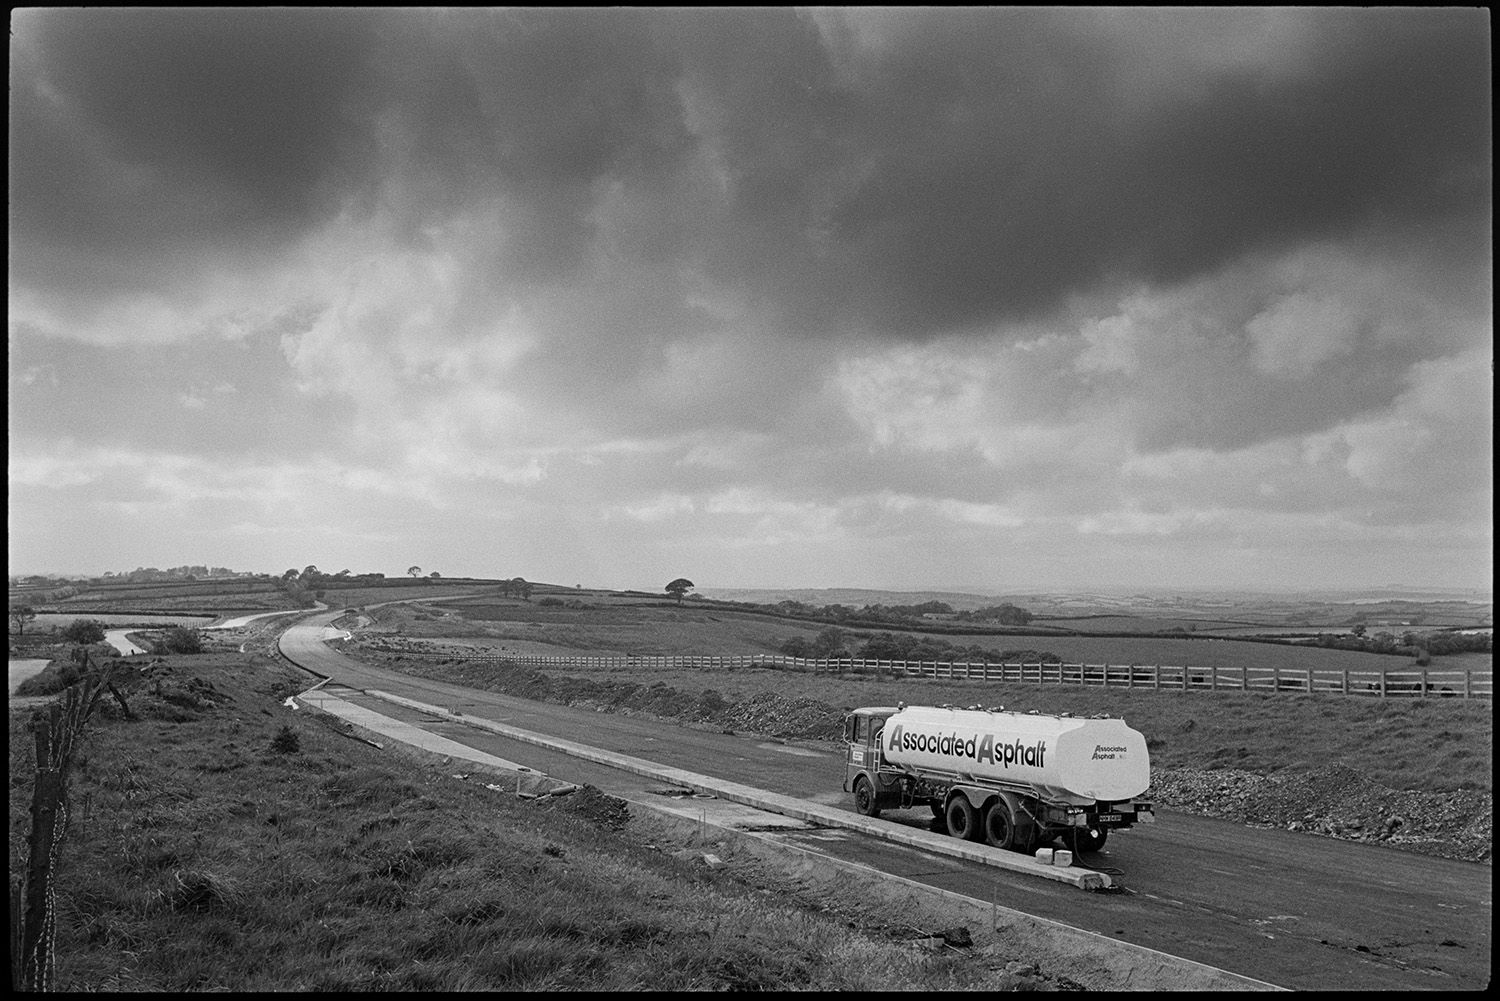 Standing stone beside new road it was moved before the road was laid down, passing tanker.
[A tanker lorry belonging to Associated Asphalt travelling along the new North Devon link road near Rackenford just before it opened. There is a wooden fence and rural landscape with fields and hedgerows in the background, with a stormy sky above.]